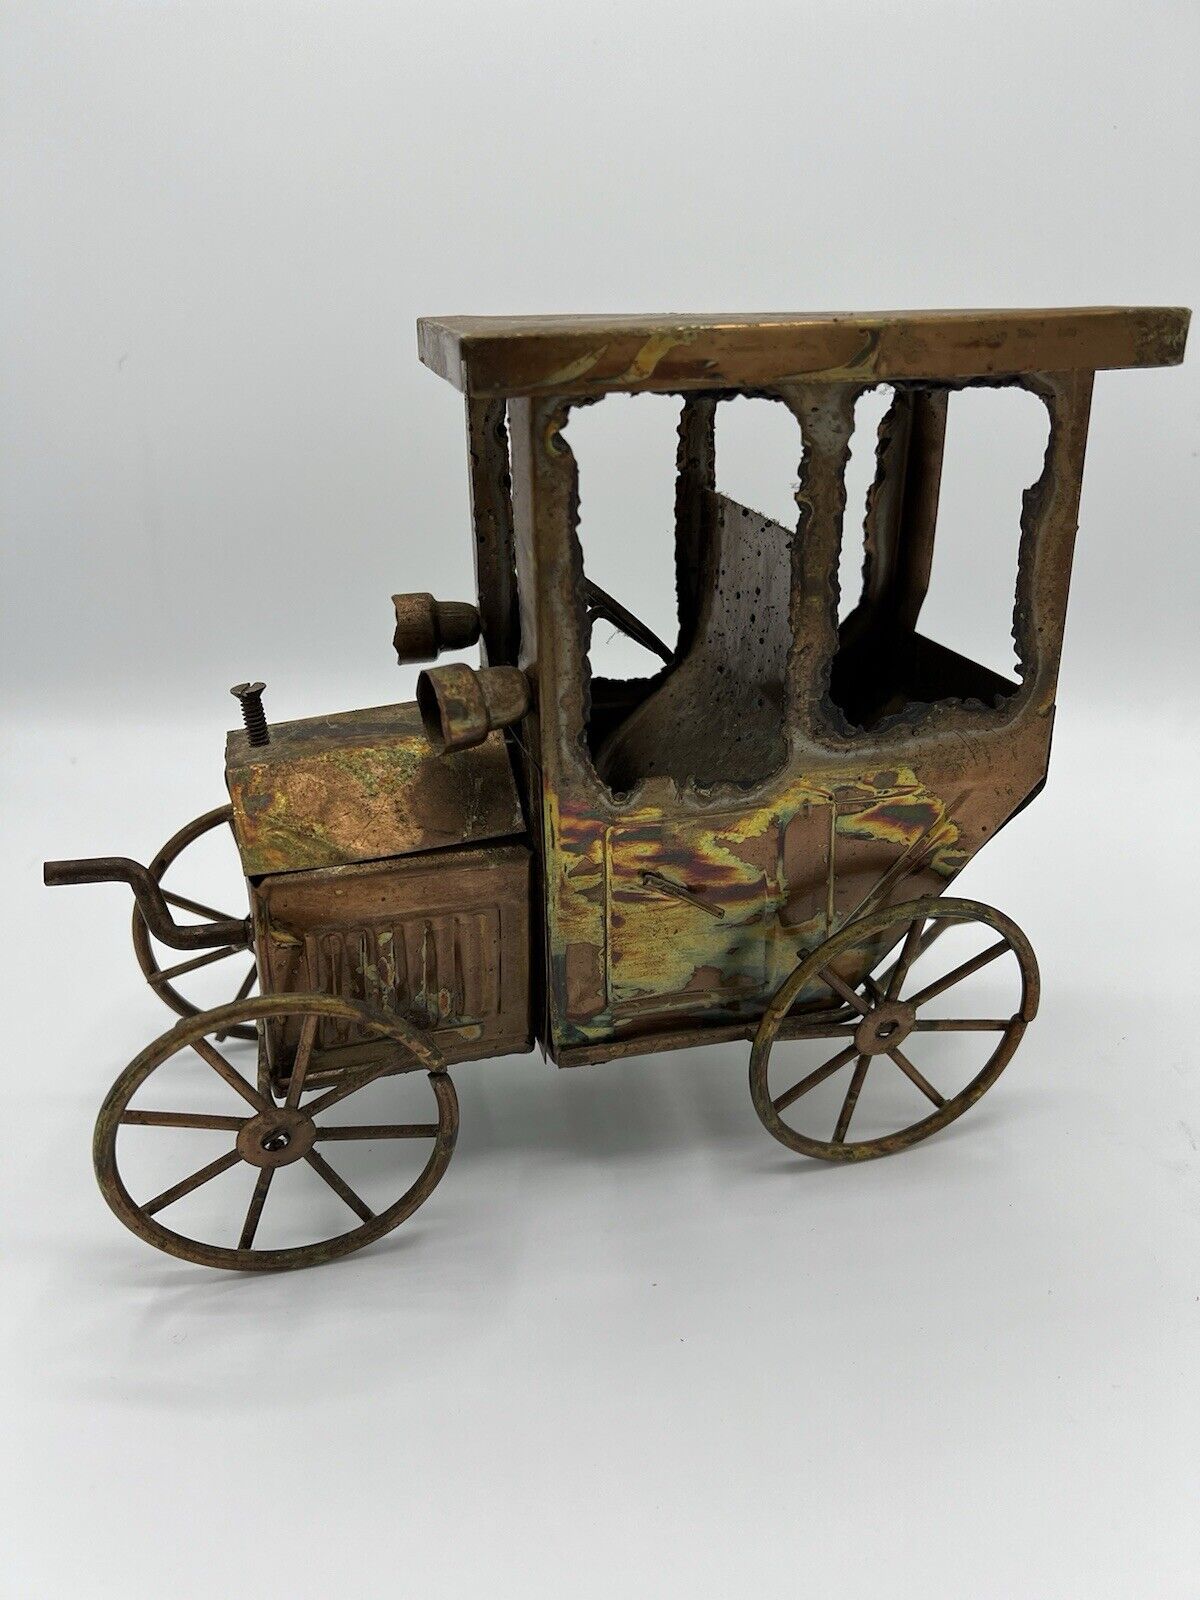 Vintage Collectible Sculpted Copper Metal Antique Model T Car Working Music Box